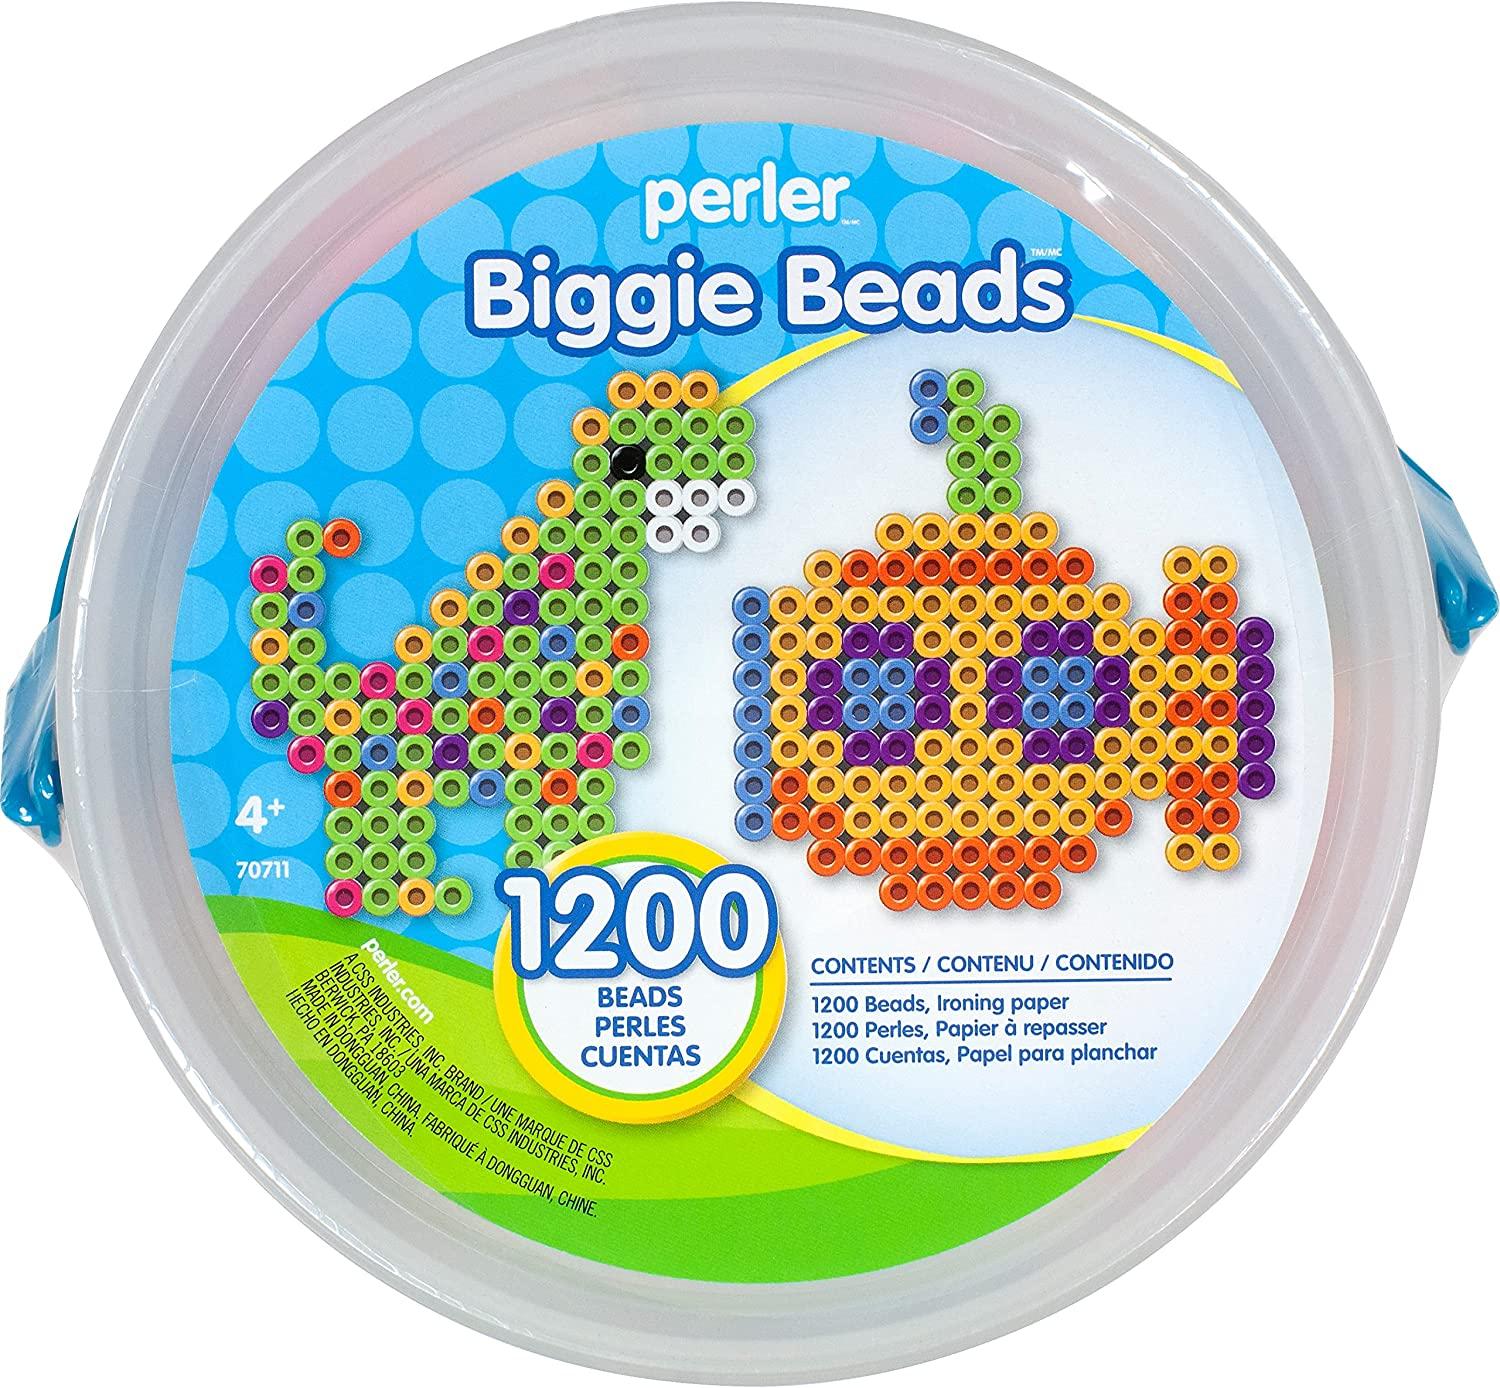 BIGGIE BEAD TRAY AND PATTER BOARD - Creative Kids